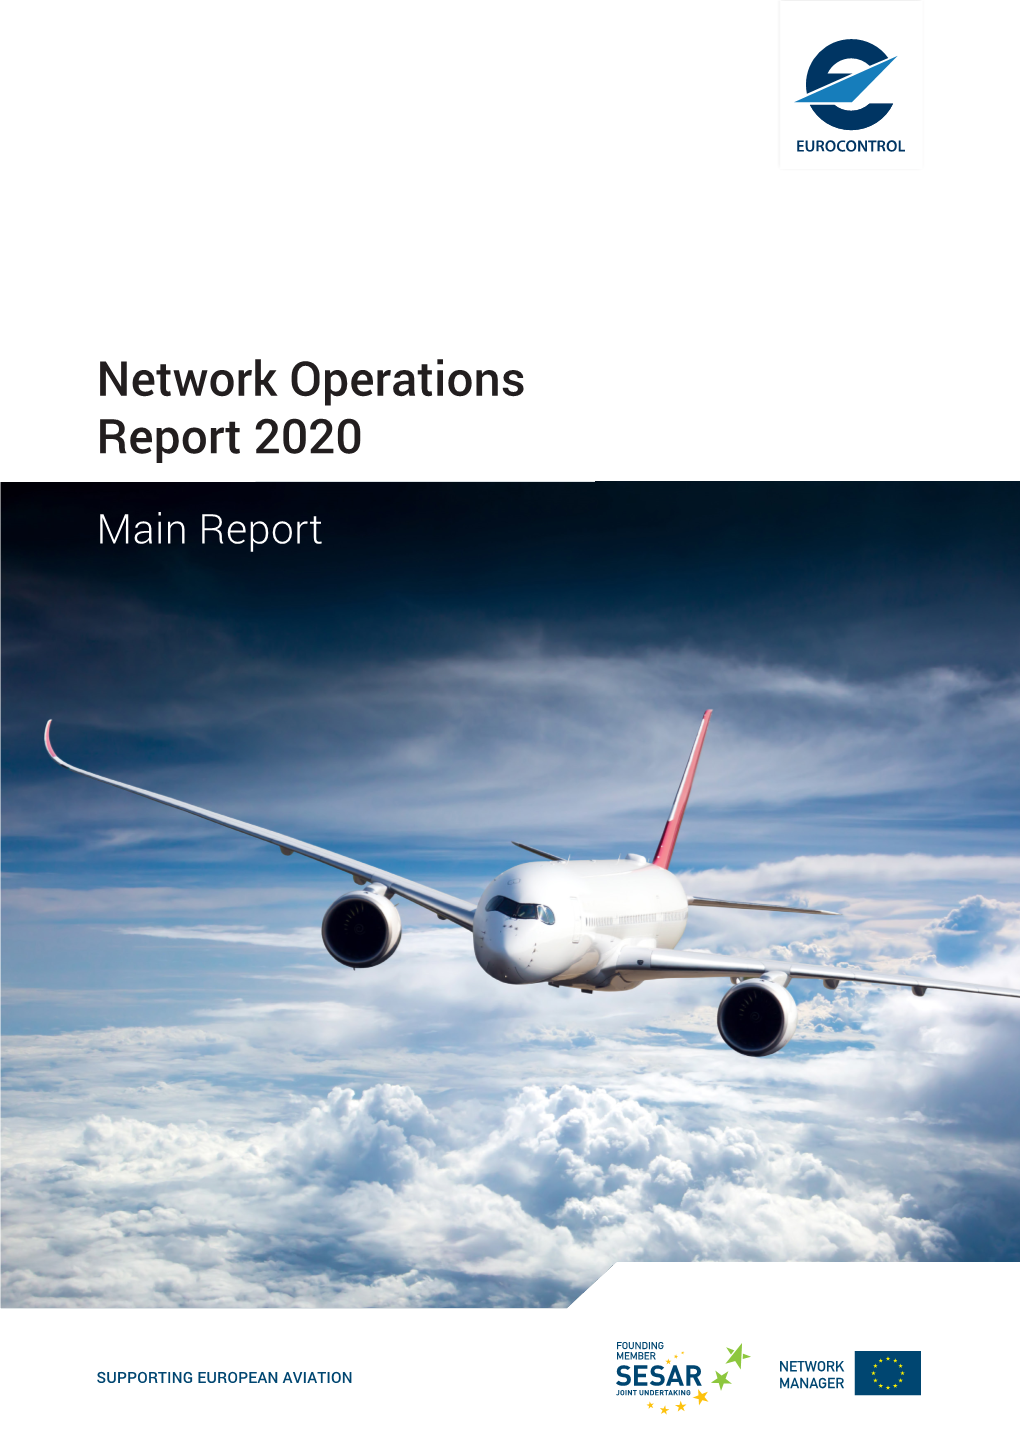 Network Operations Report 2020